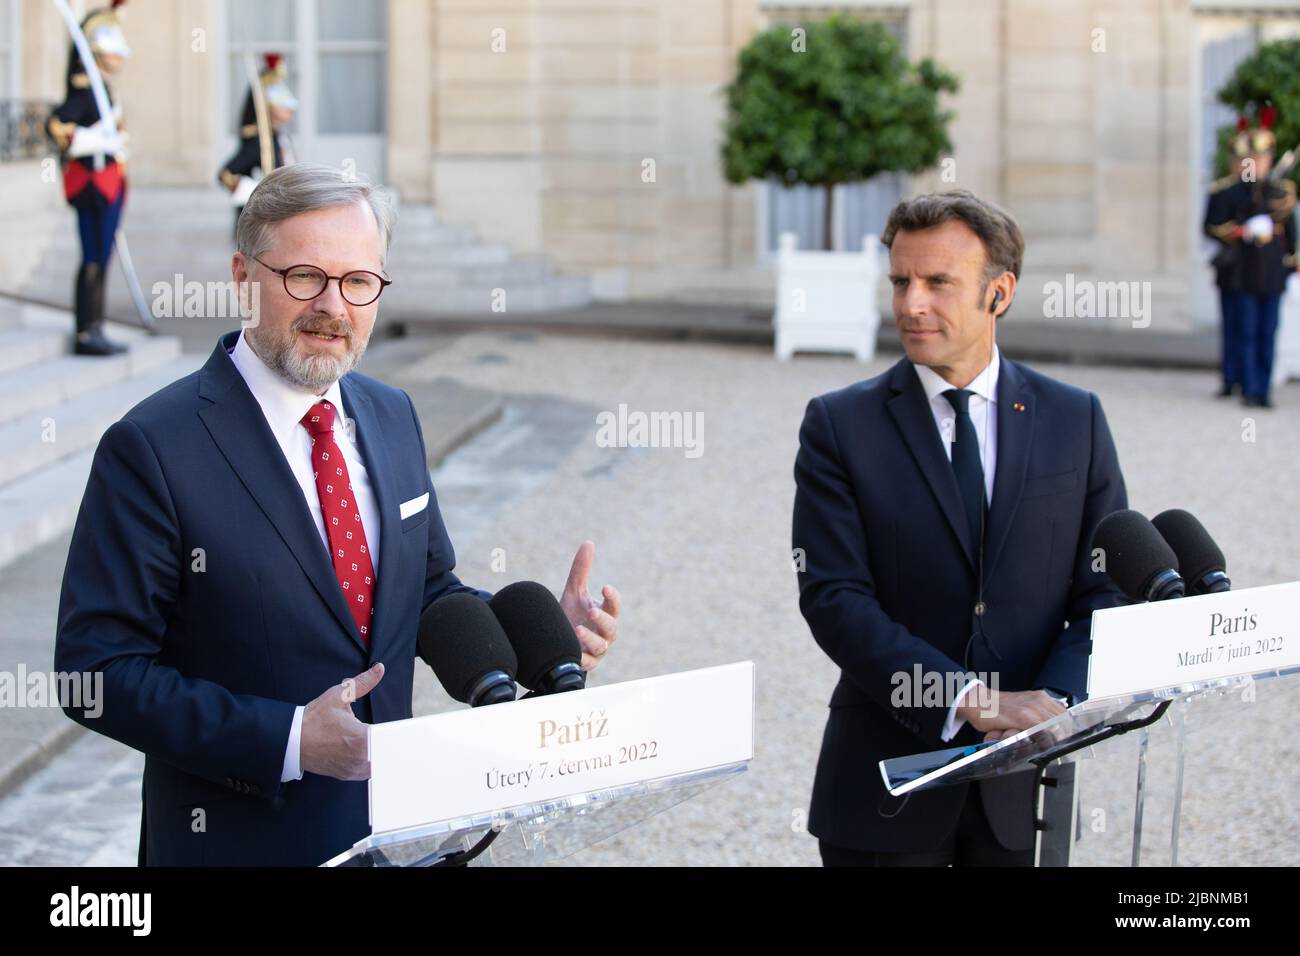 Paris, France the 7 June 2022, meeting between the  Czech Prime Minister, Petr Fiala, and the french President, Emmanuel Macron, François Loock/alamy Stock Photo